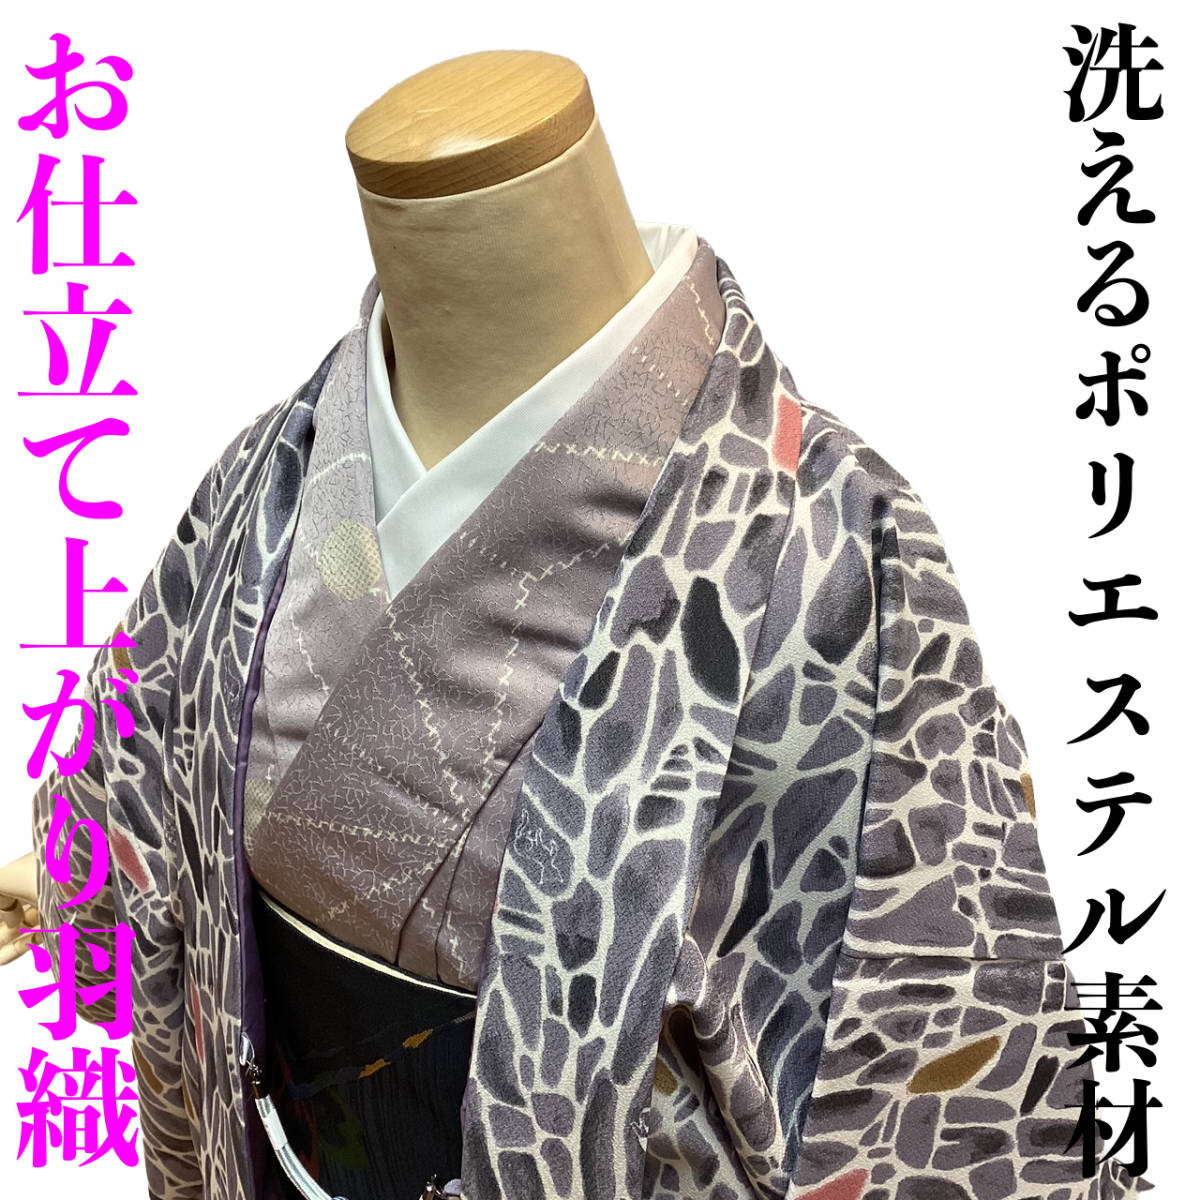  brand new feather woven ha165a. what .. cat pattern kimono coat ... kimono new goods postage included 